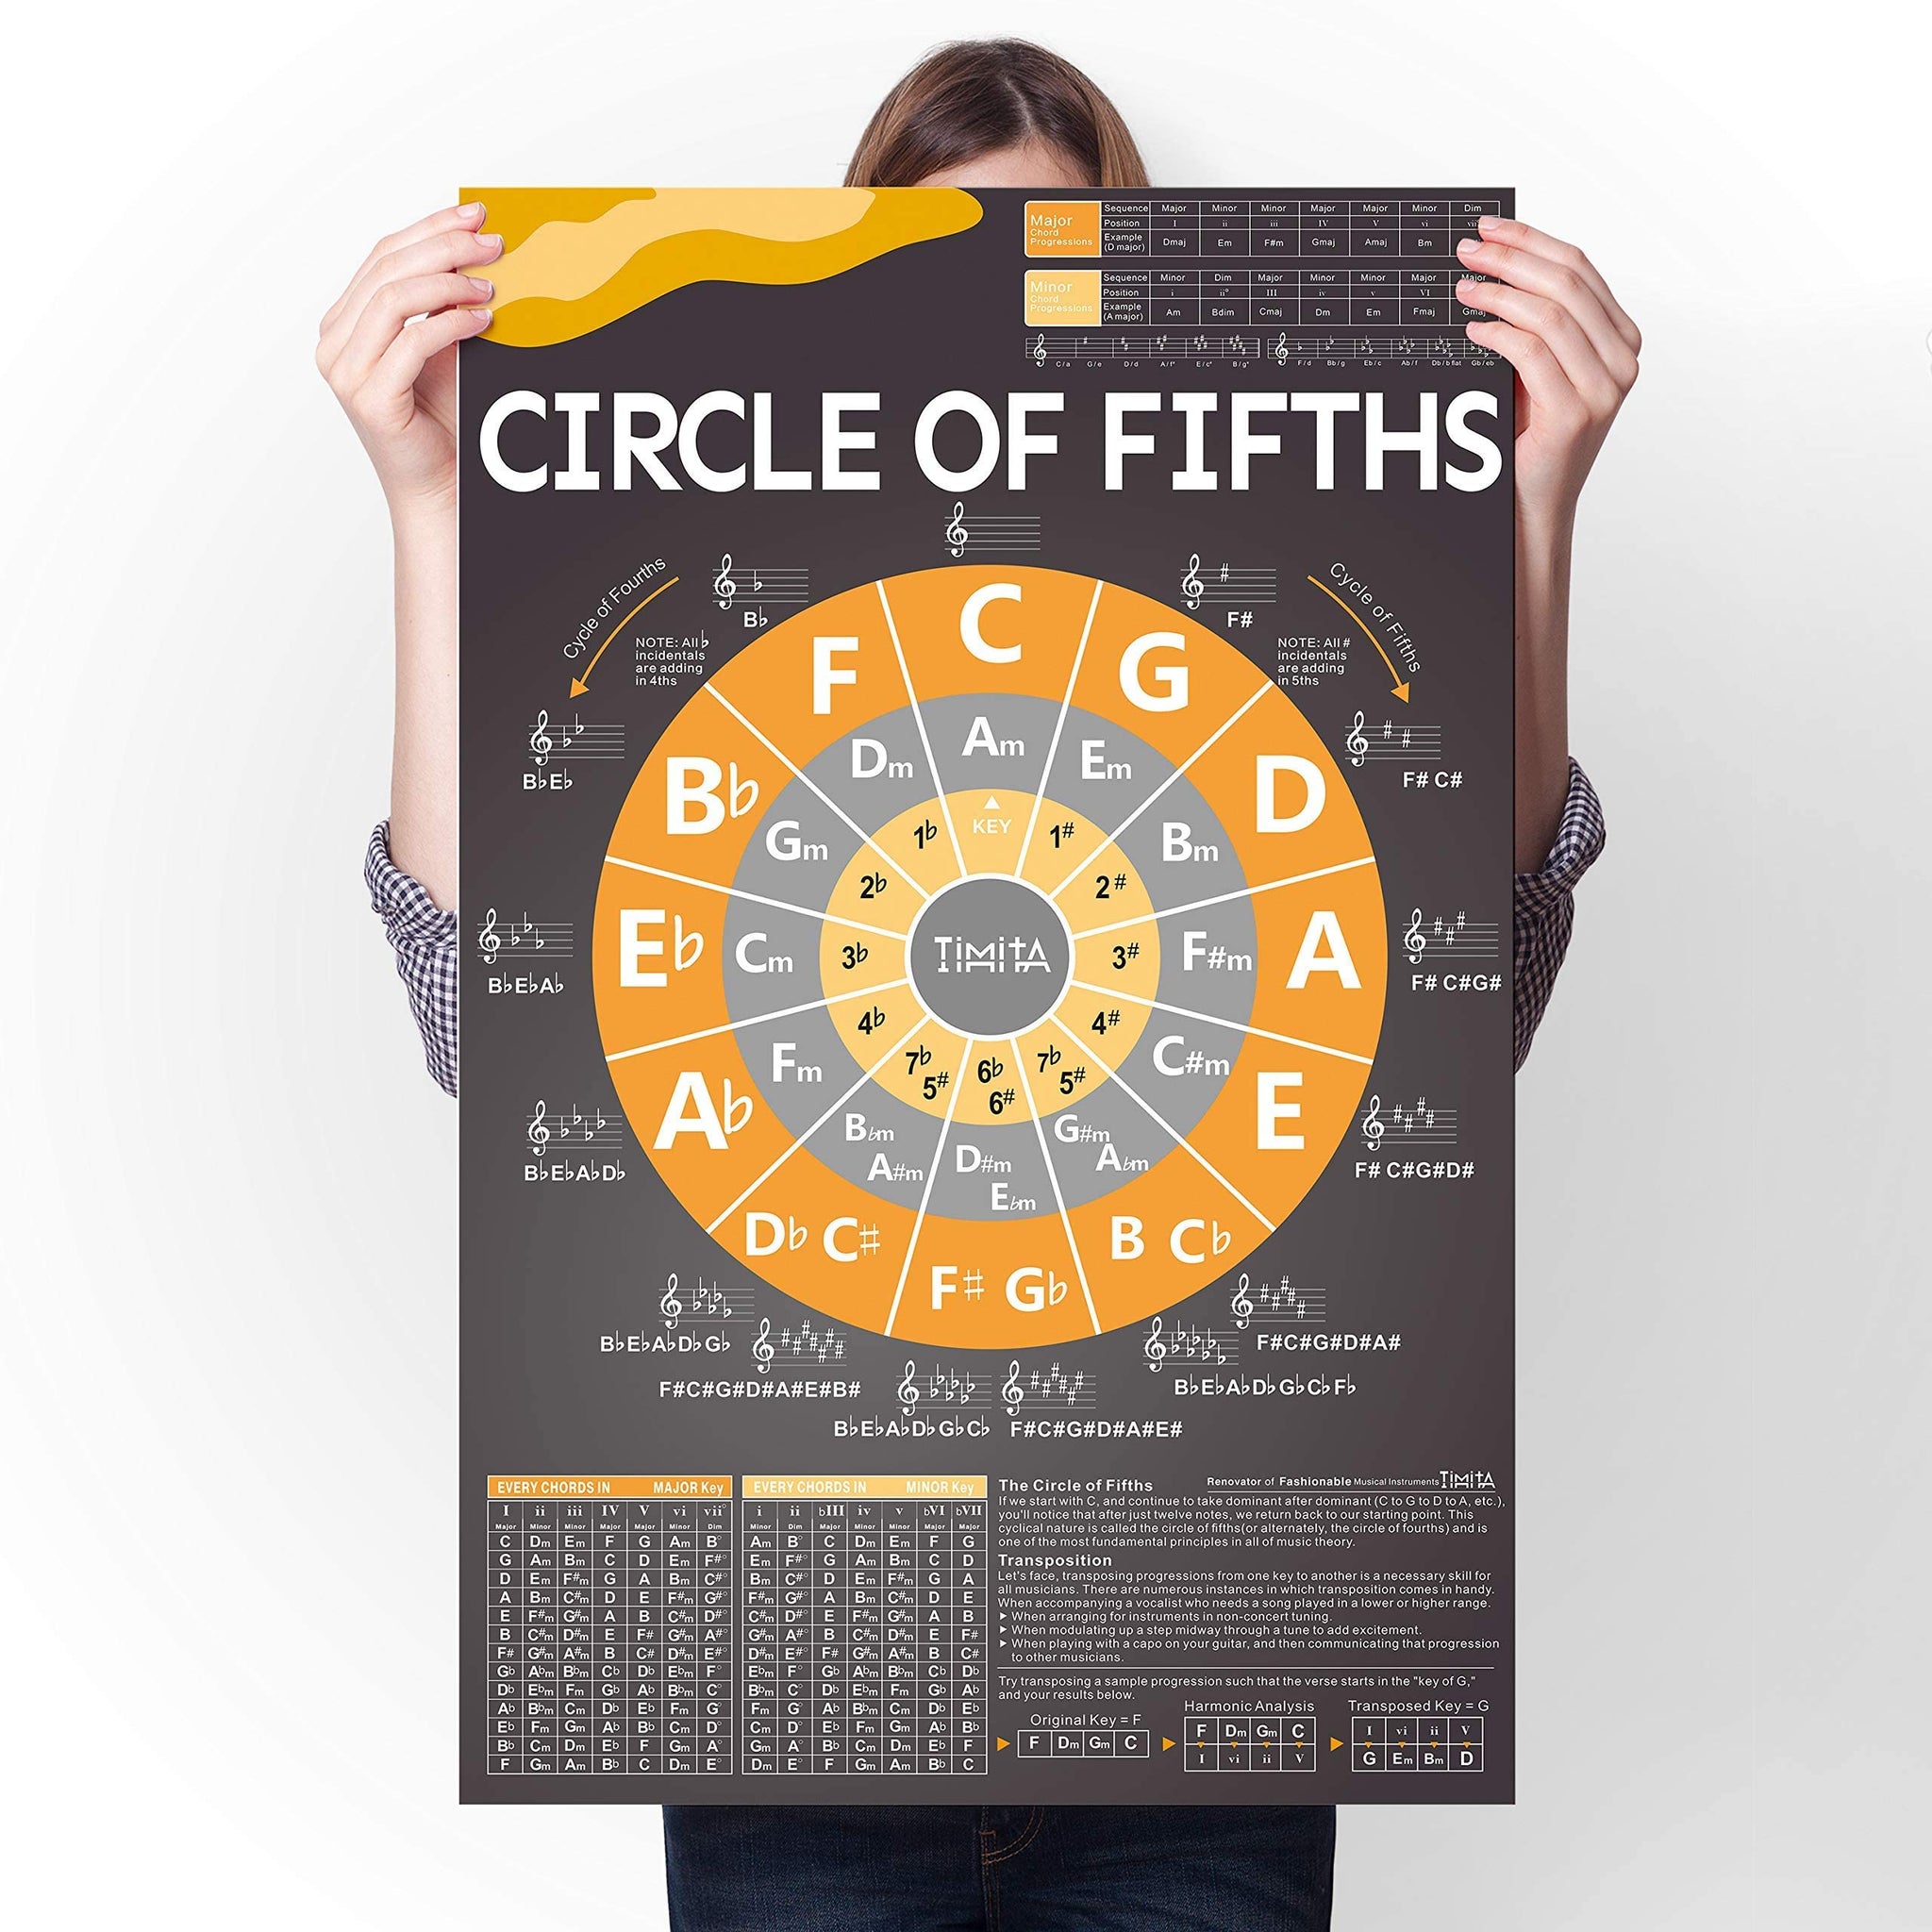 Circle Of Fifths Chart For Guitar Keyboard Piano The Chord Wheel And Music Theory For Beginner And Teachers